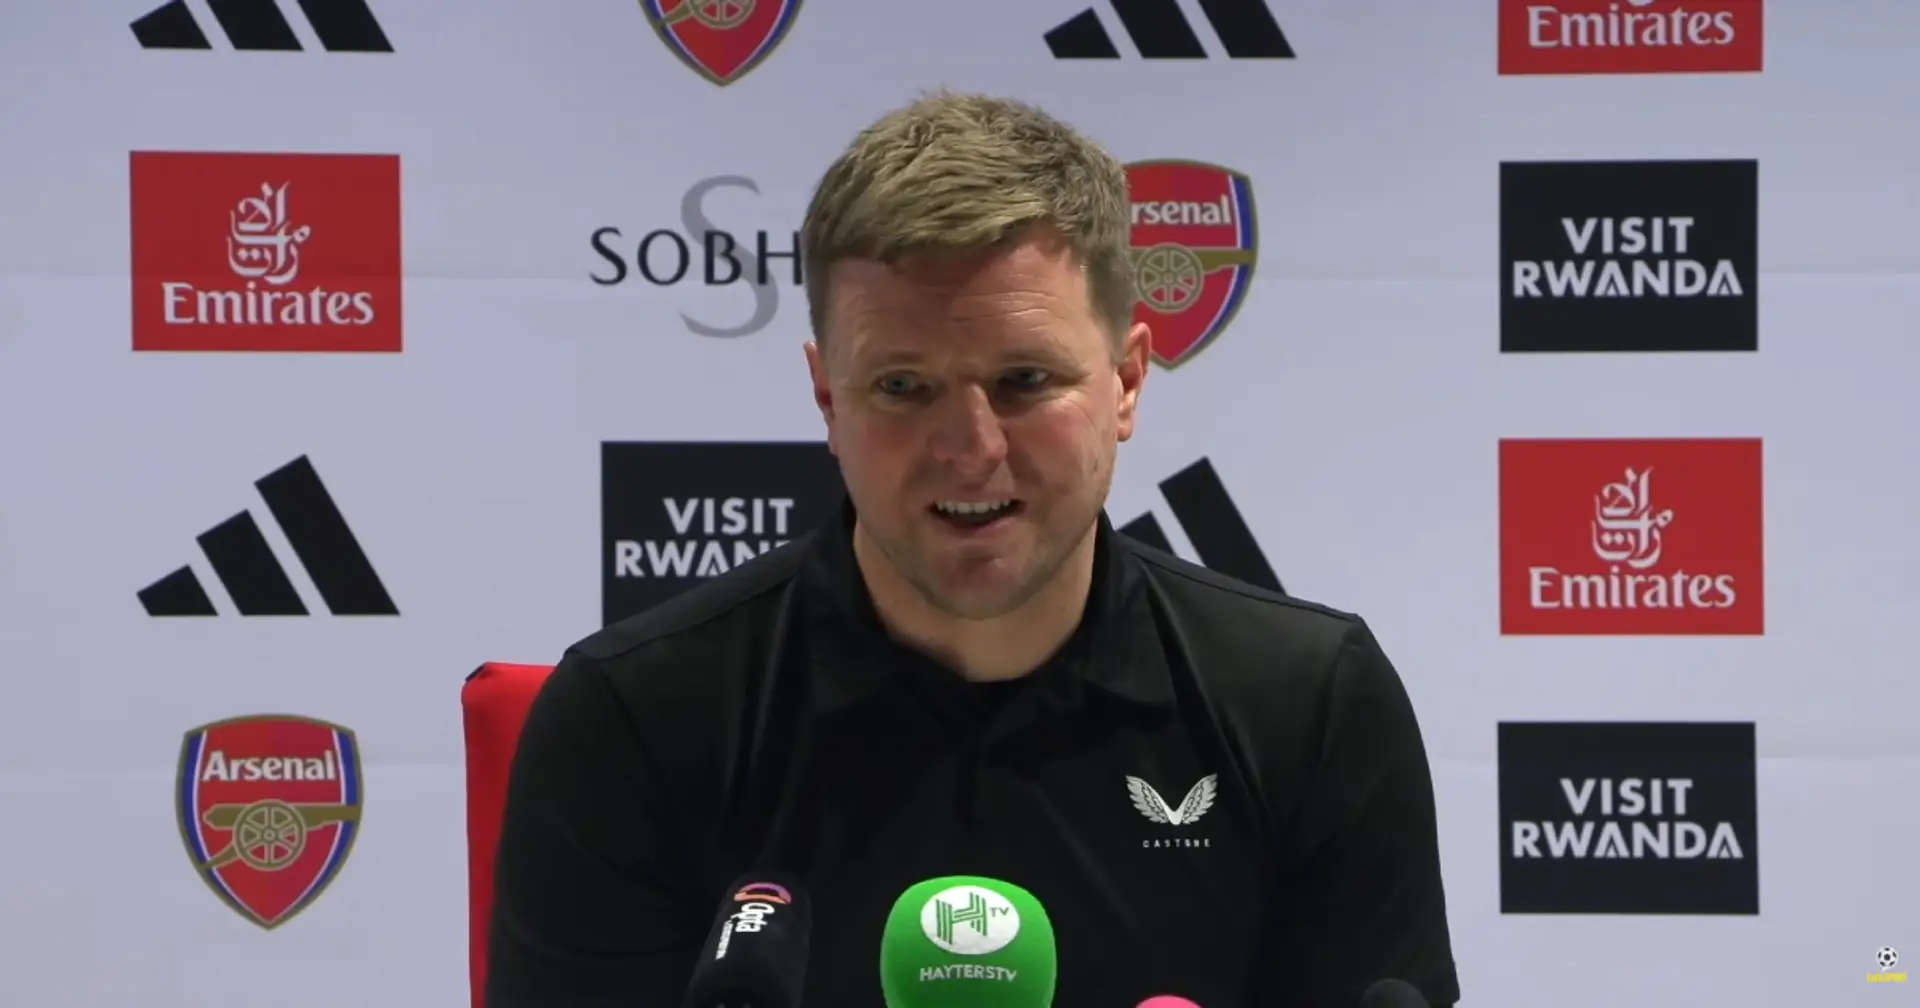 Eddie Howe names 2 key things that make Arsenal's set-piece routines so difficult to deal with